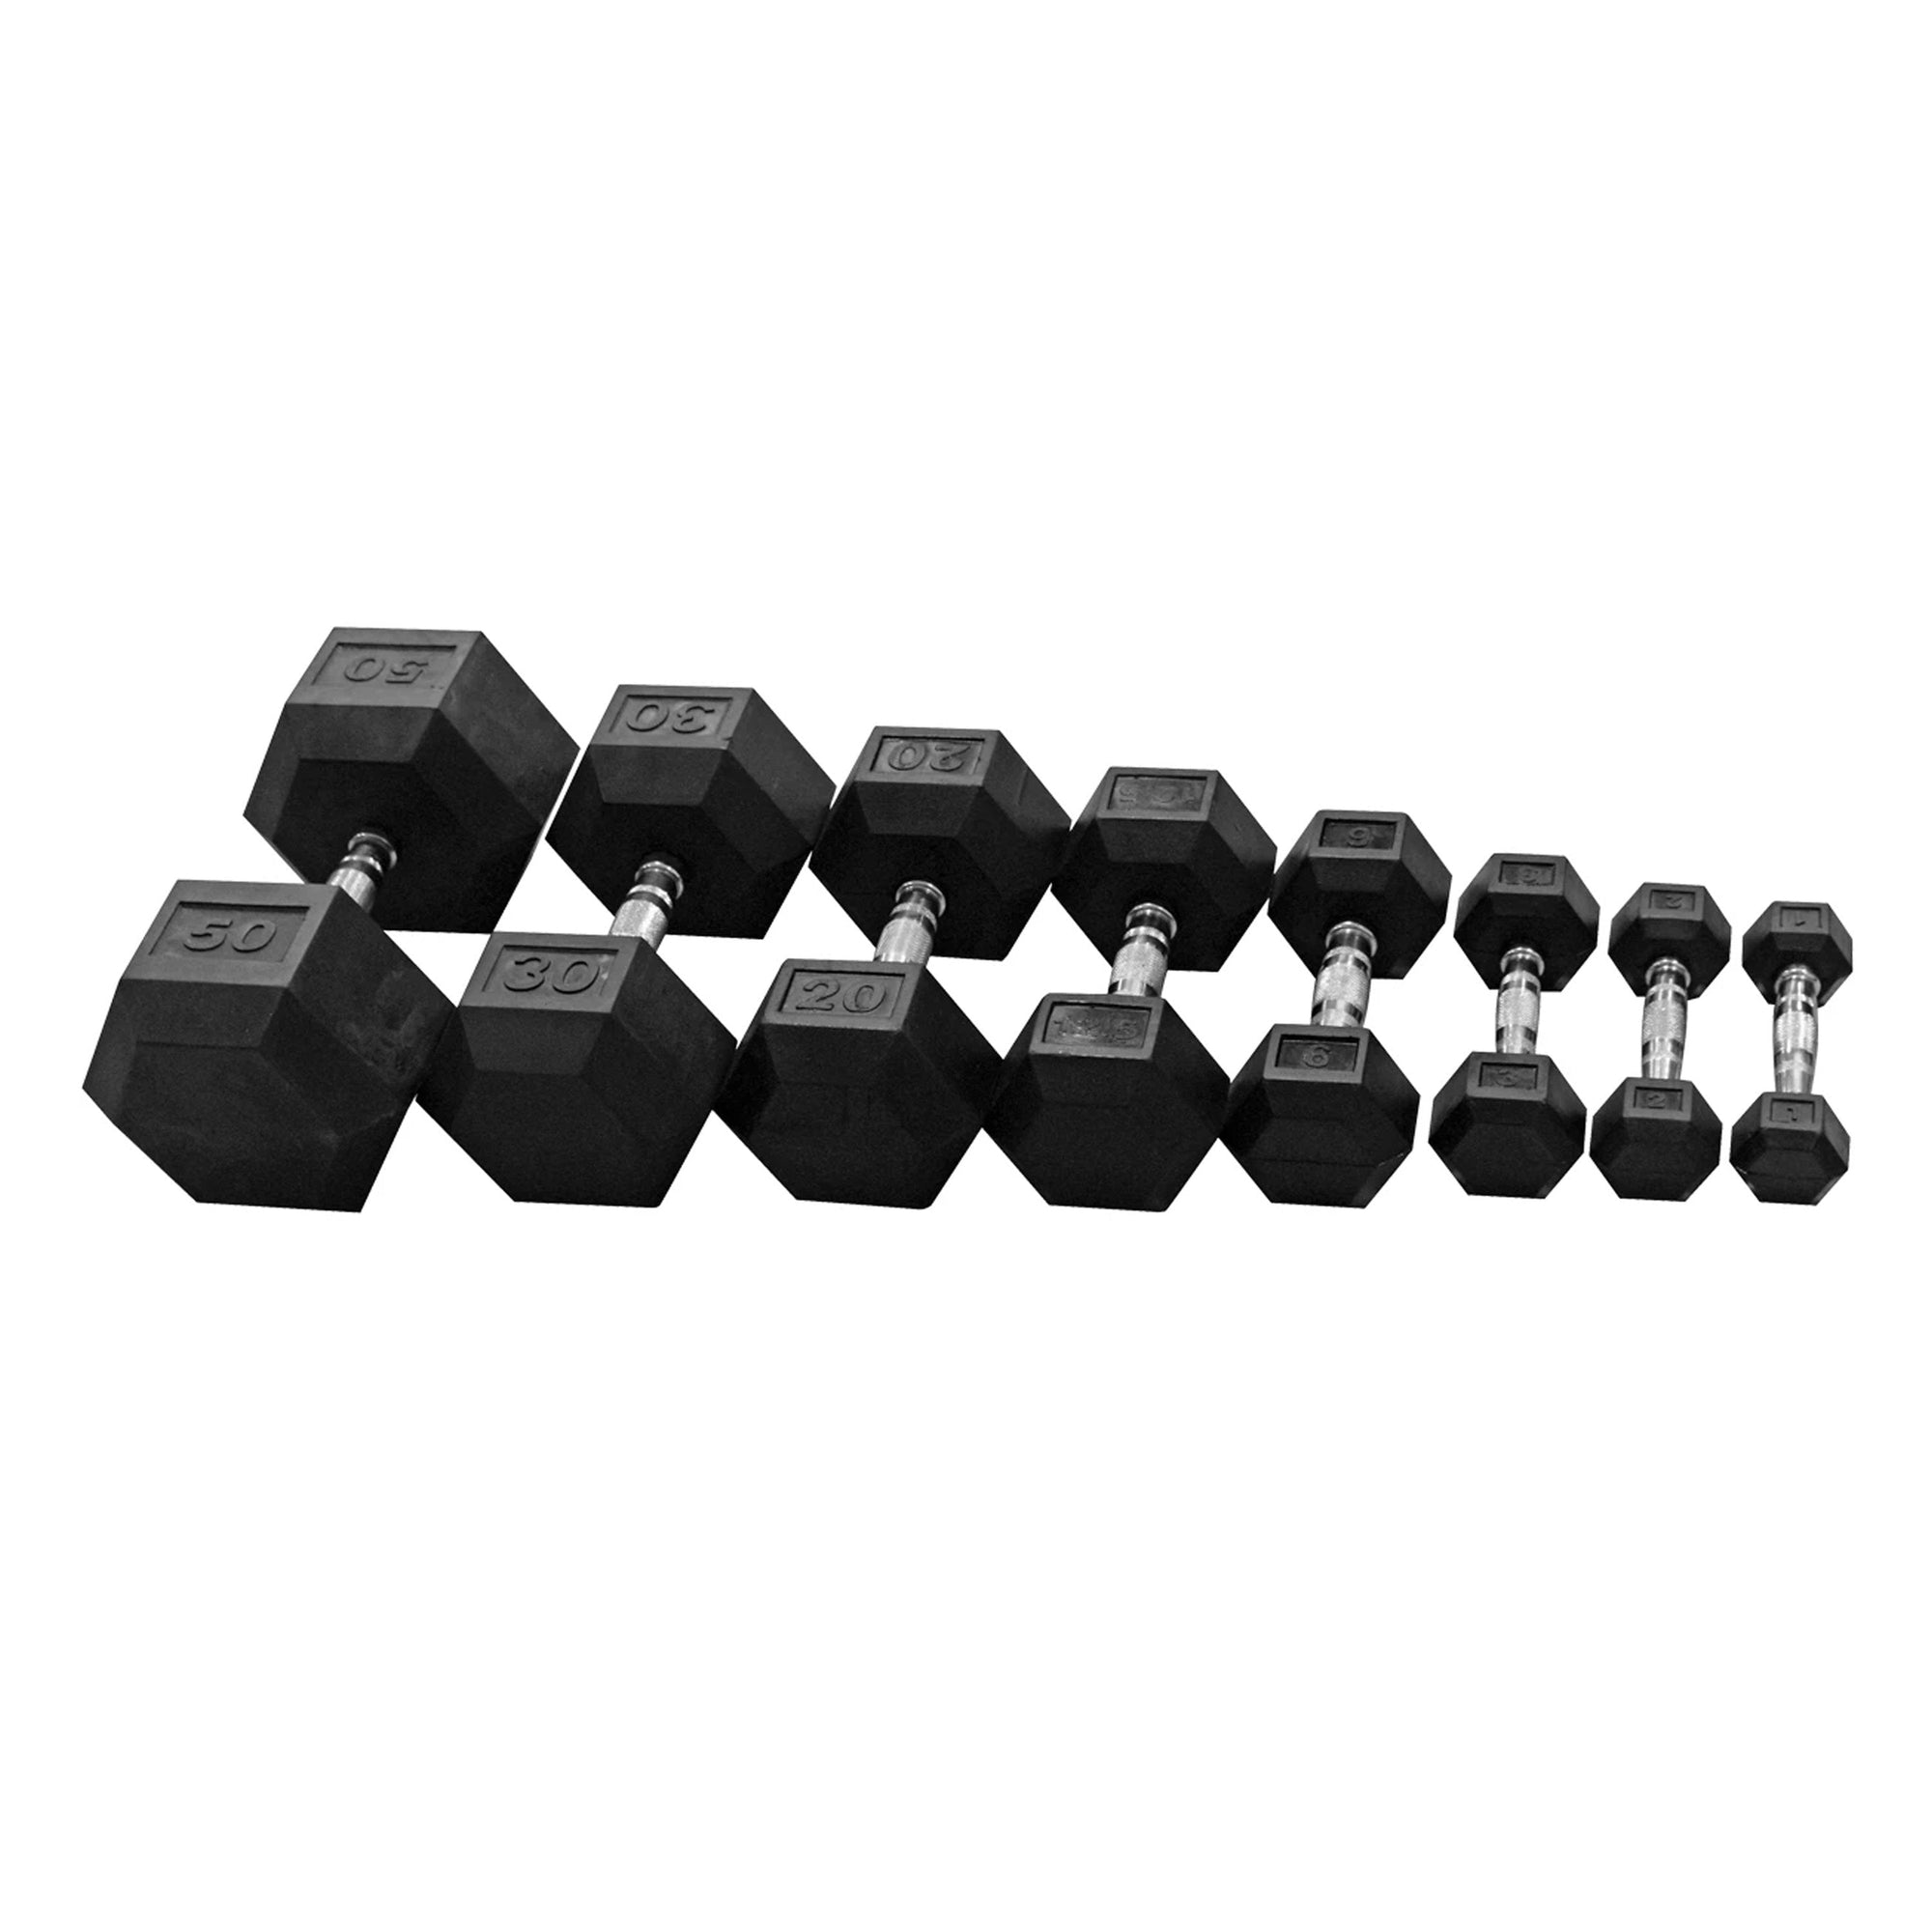 FitWay Equip. Rubber Hex Dumbbell Pair - 25lb